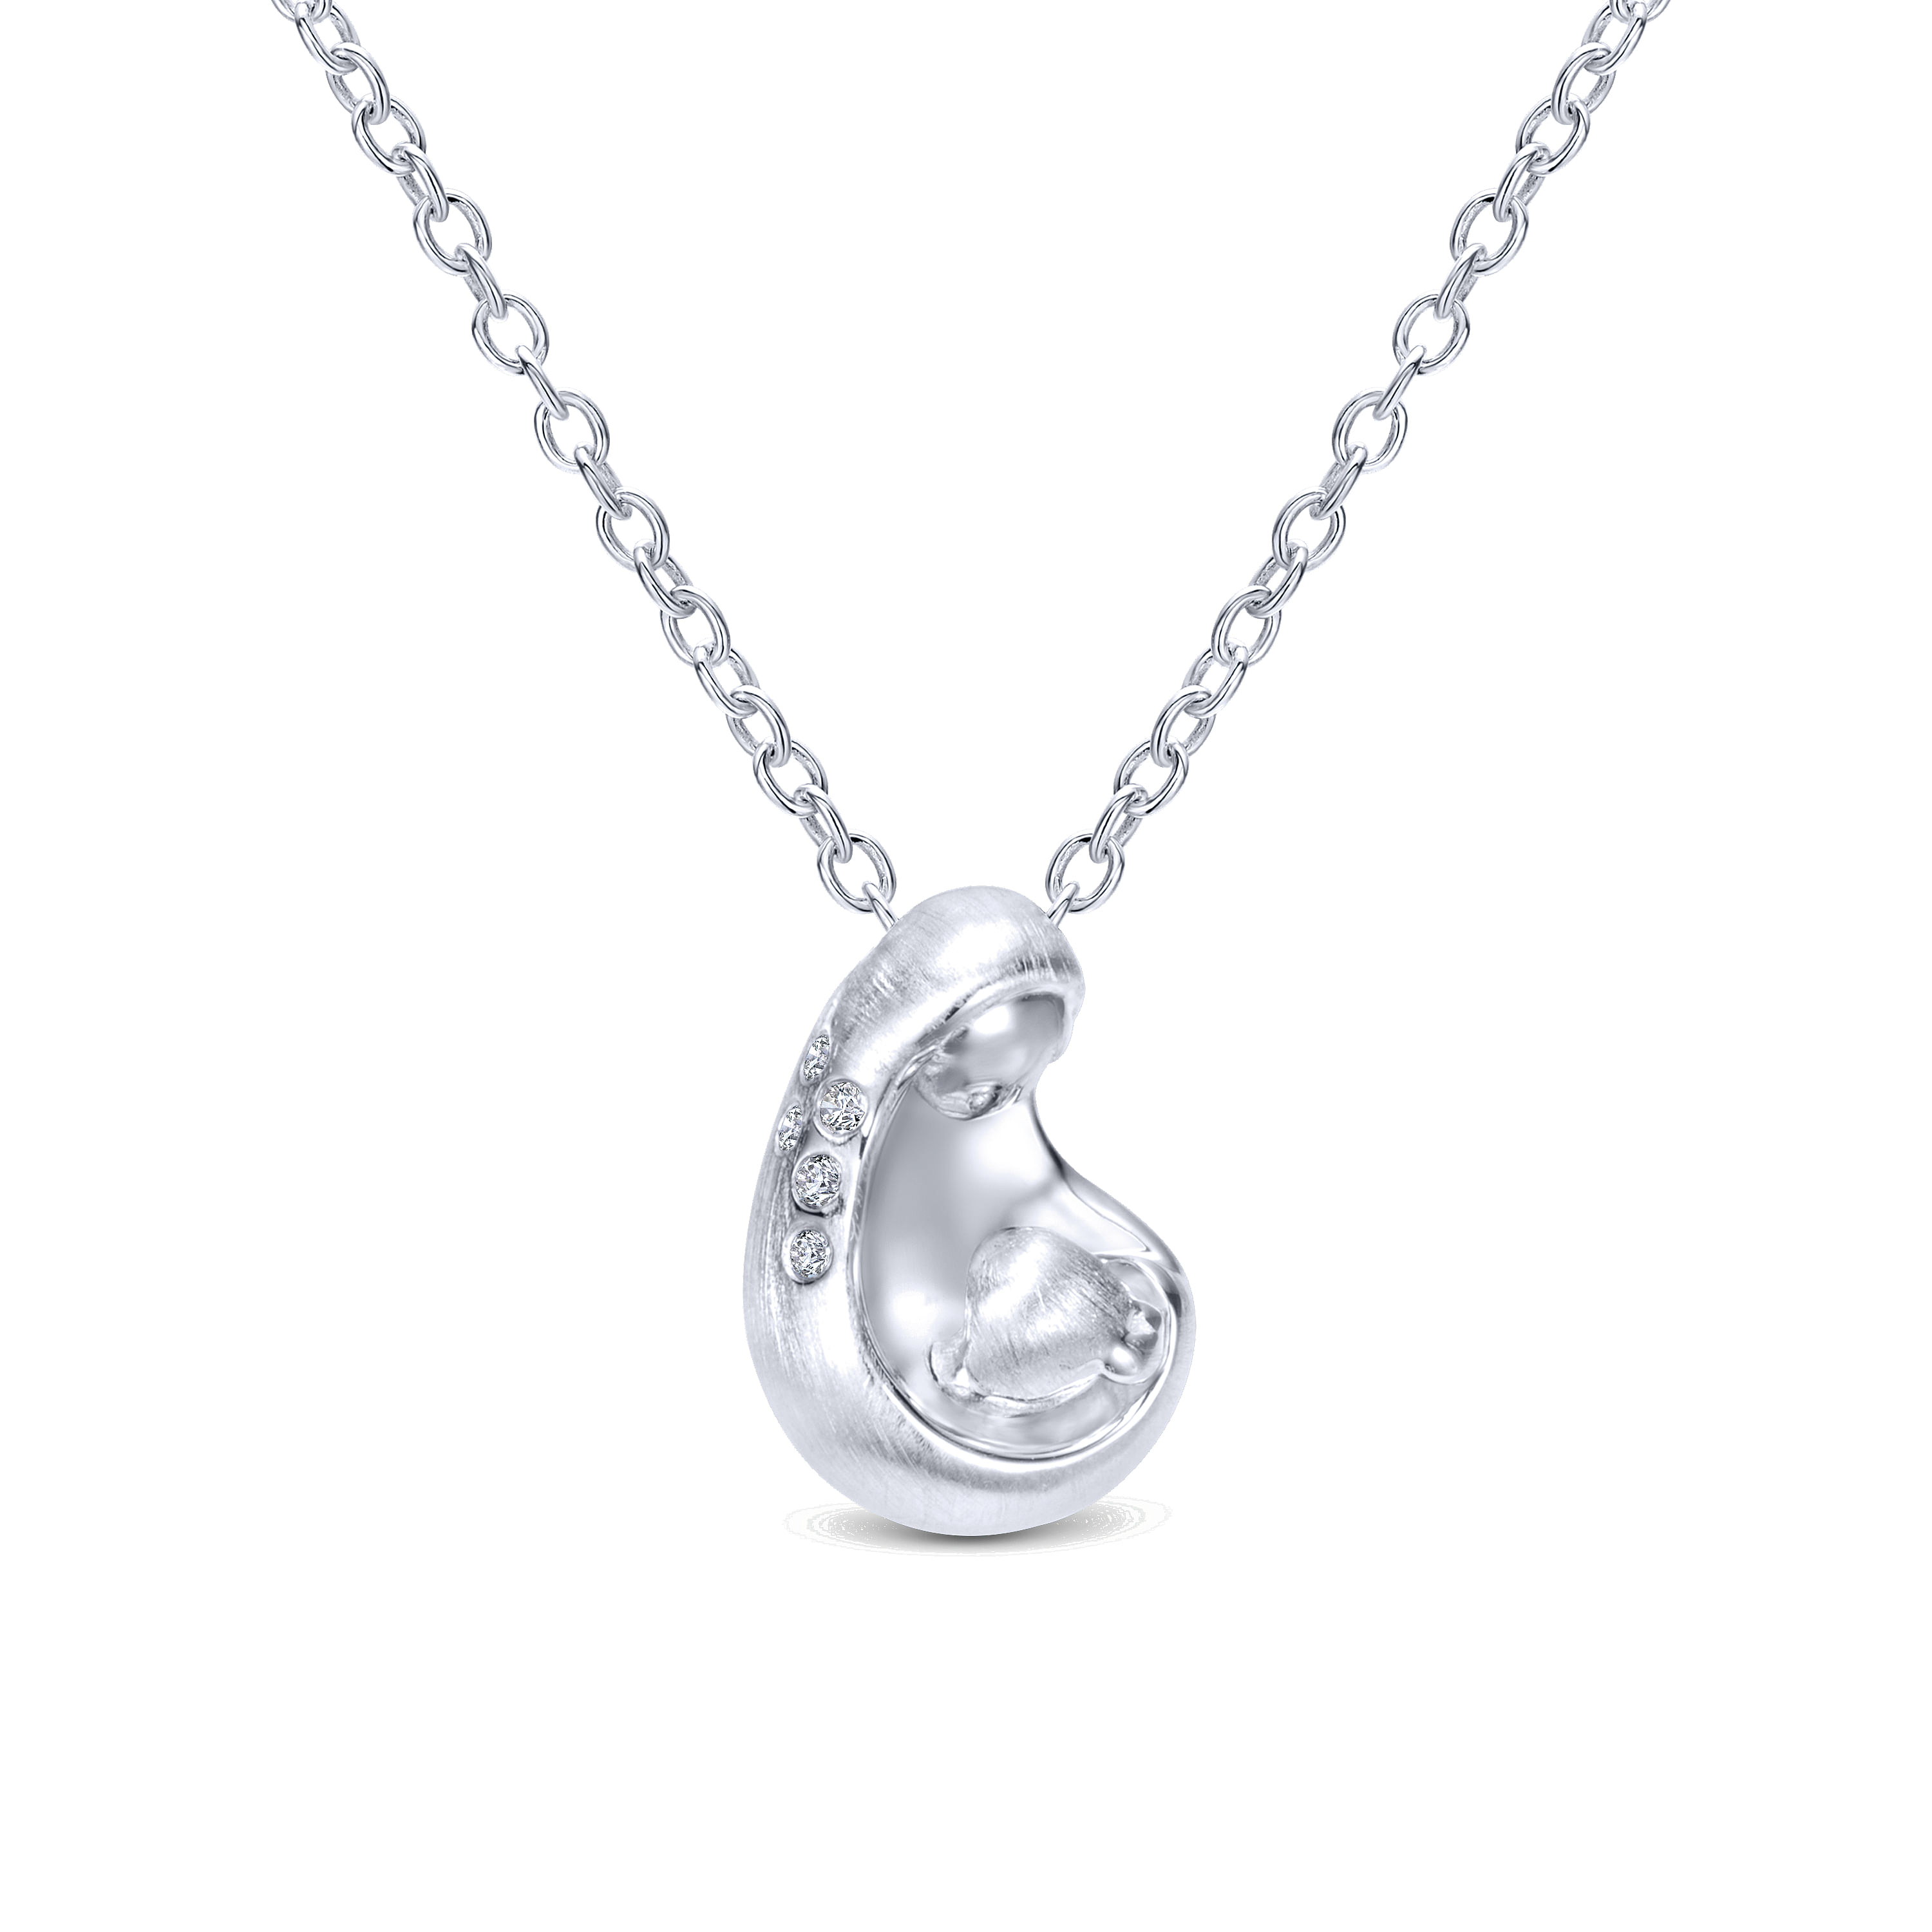 18 inch 925 Sterling Silver Swirling Diamond Pendant Necklace